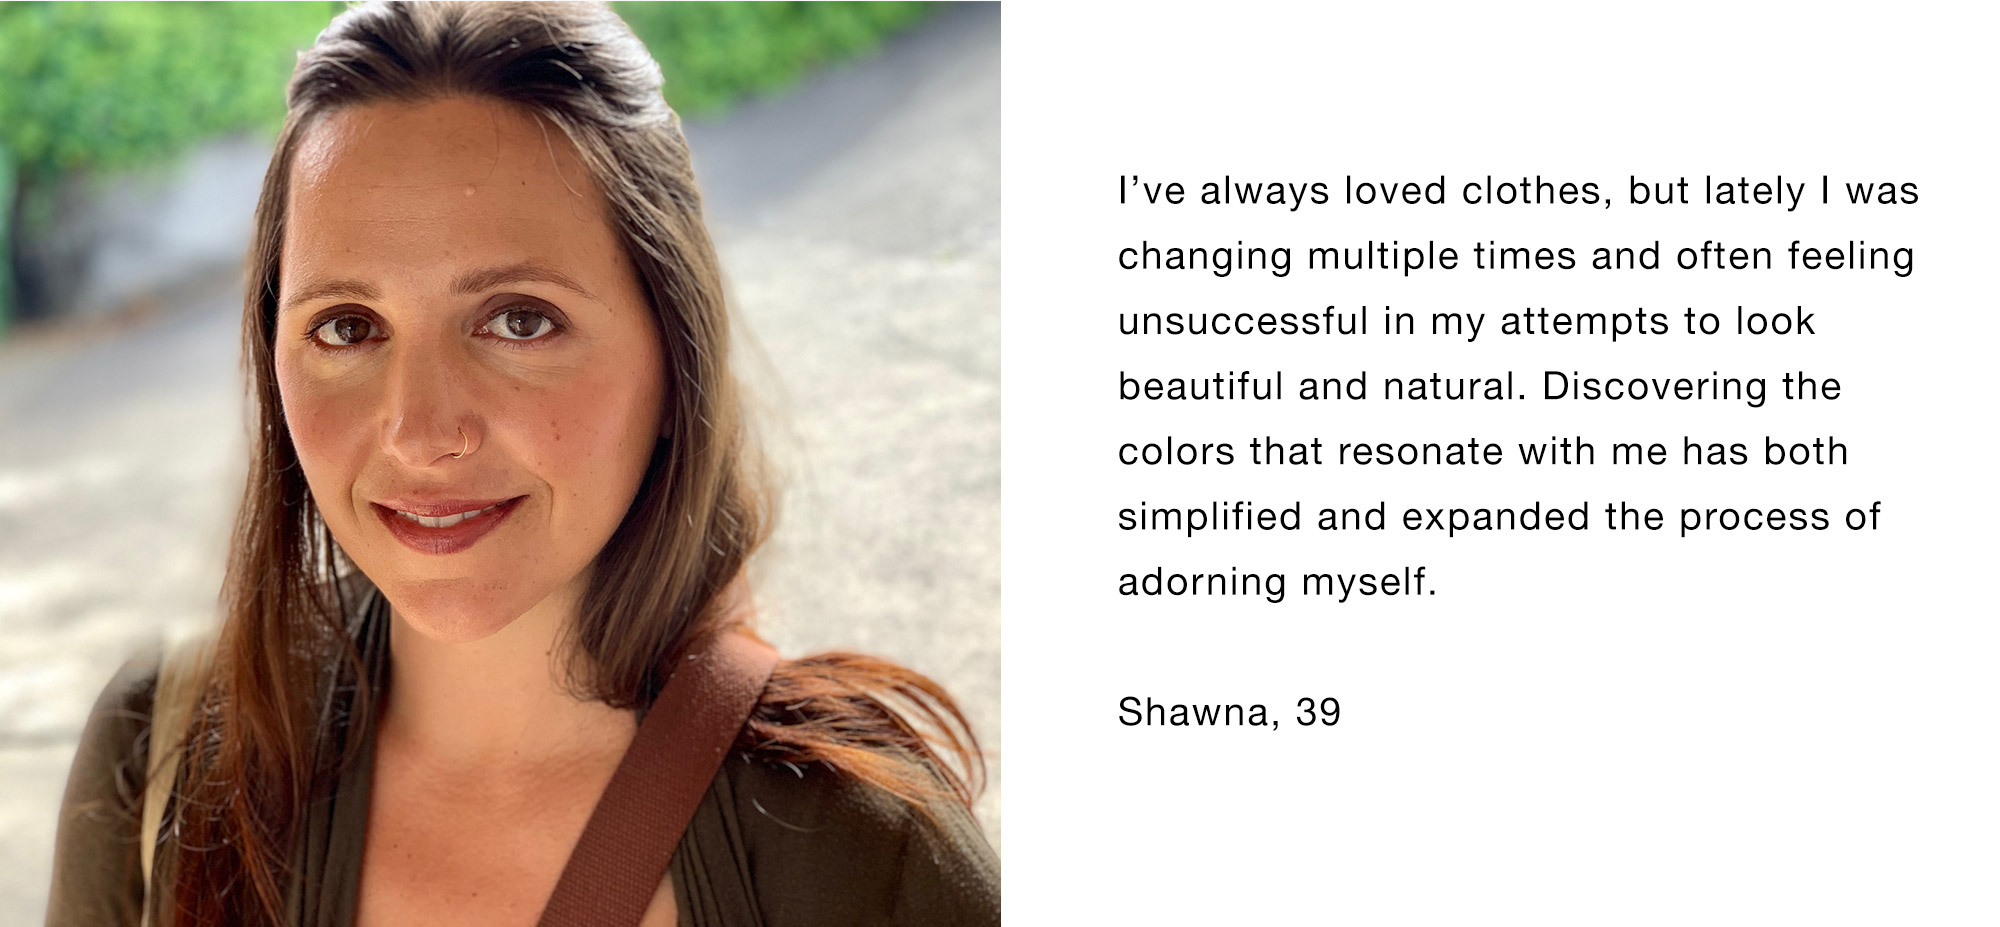 I’ve always loved clothes, but lately I was changing multiple times and often feeling unsuccessful in my attempts to look beautiful and natural. Discovering the colors that resonate with me has both simplified and expanded the process of adorning myself. Shawna, 39